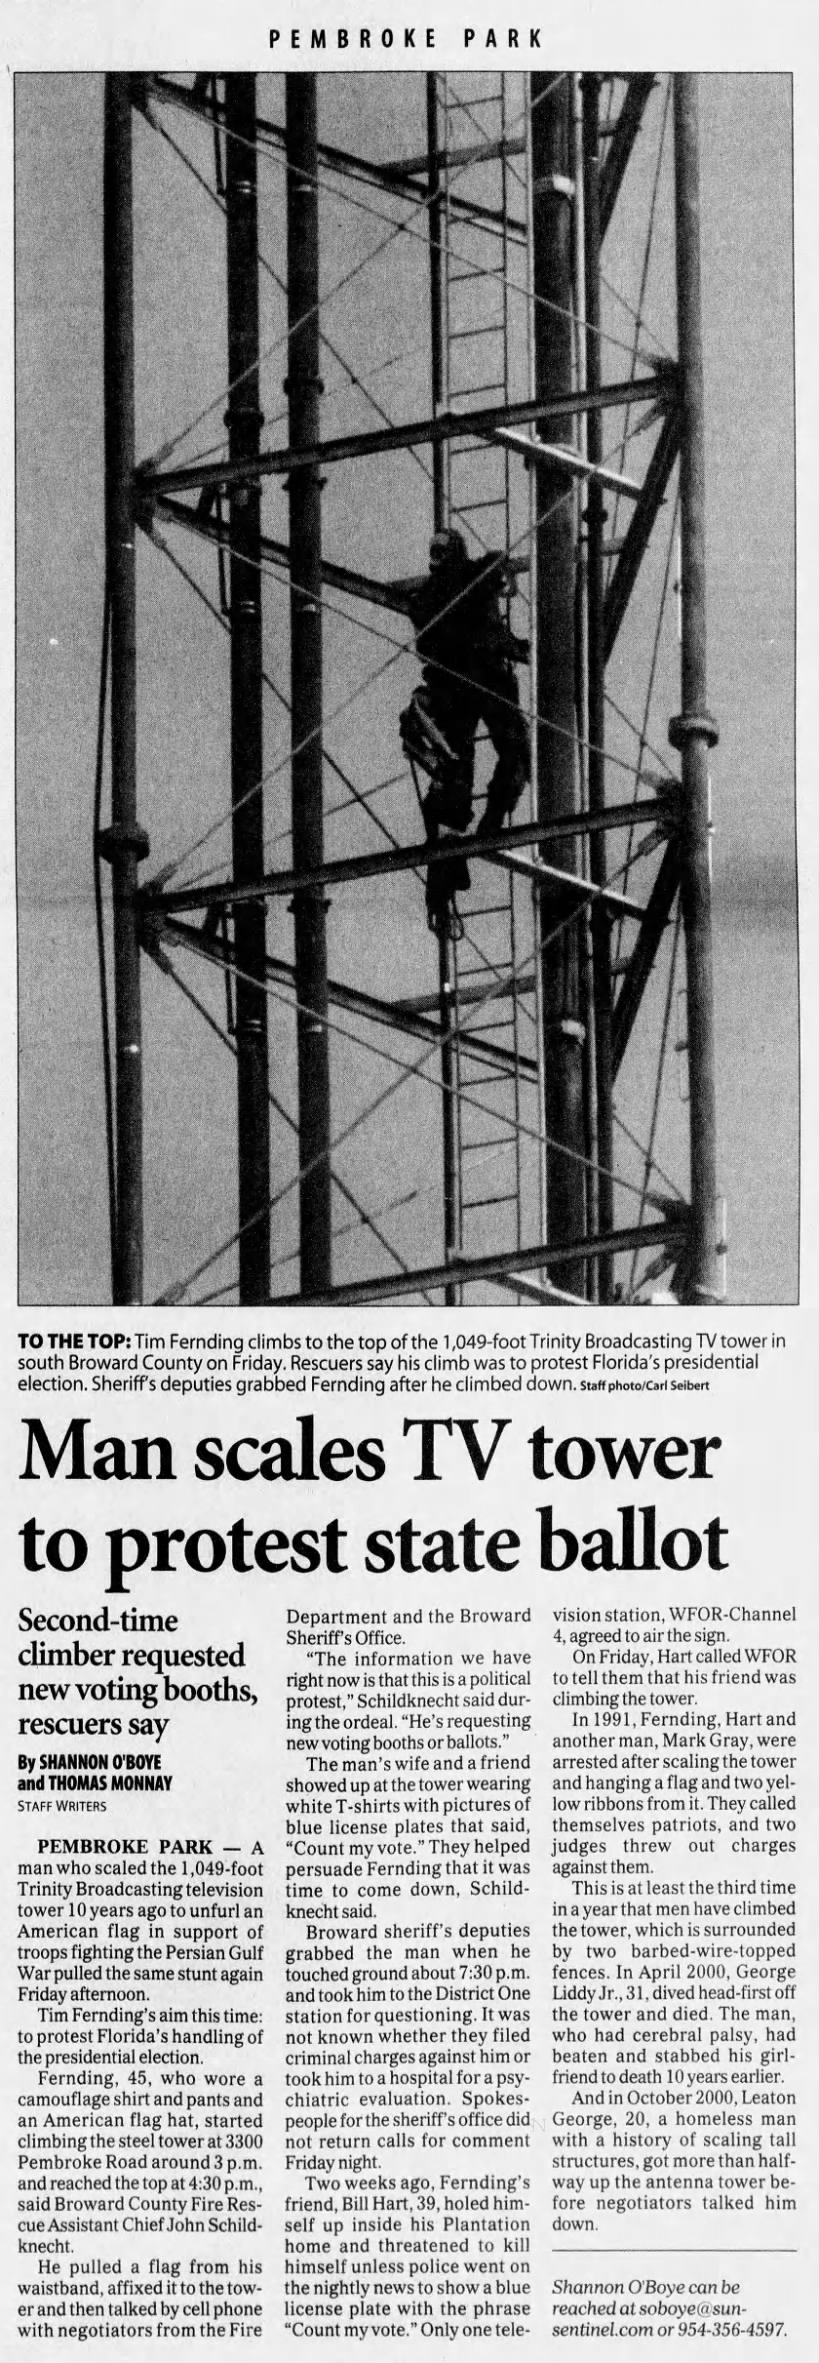 Man scales TV tower to protest state ballot